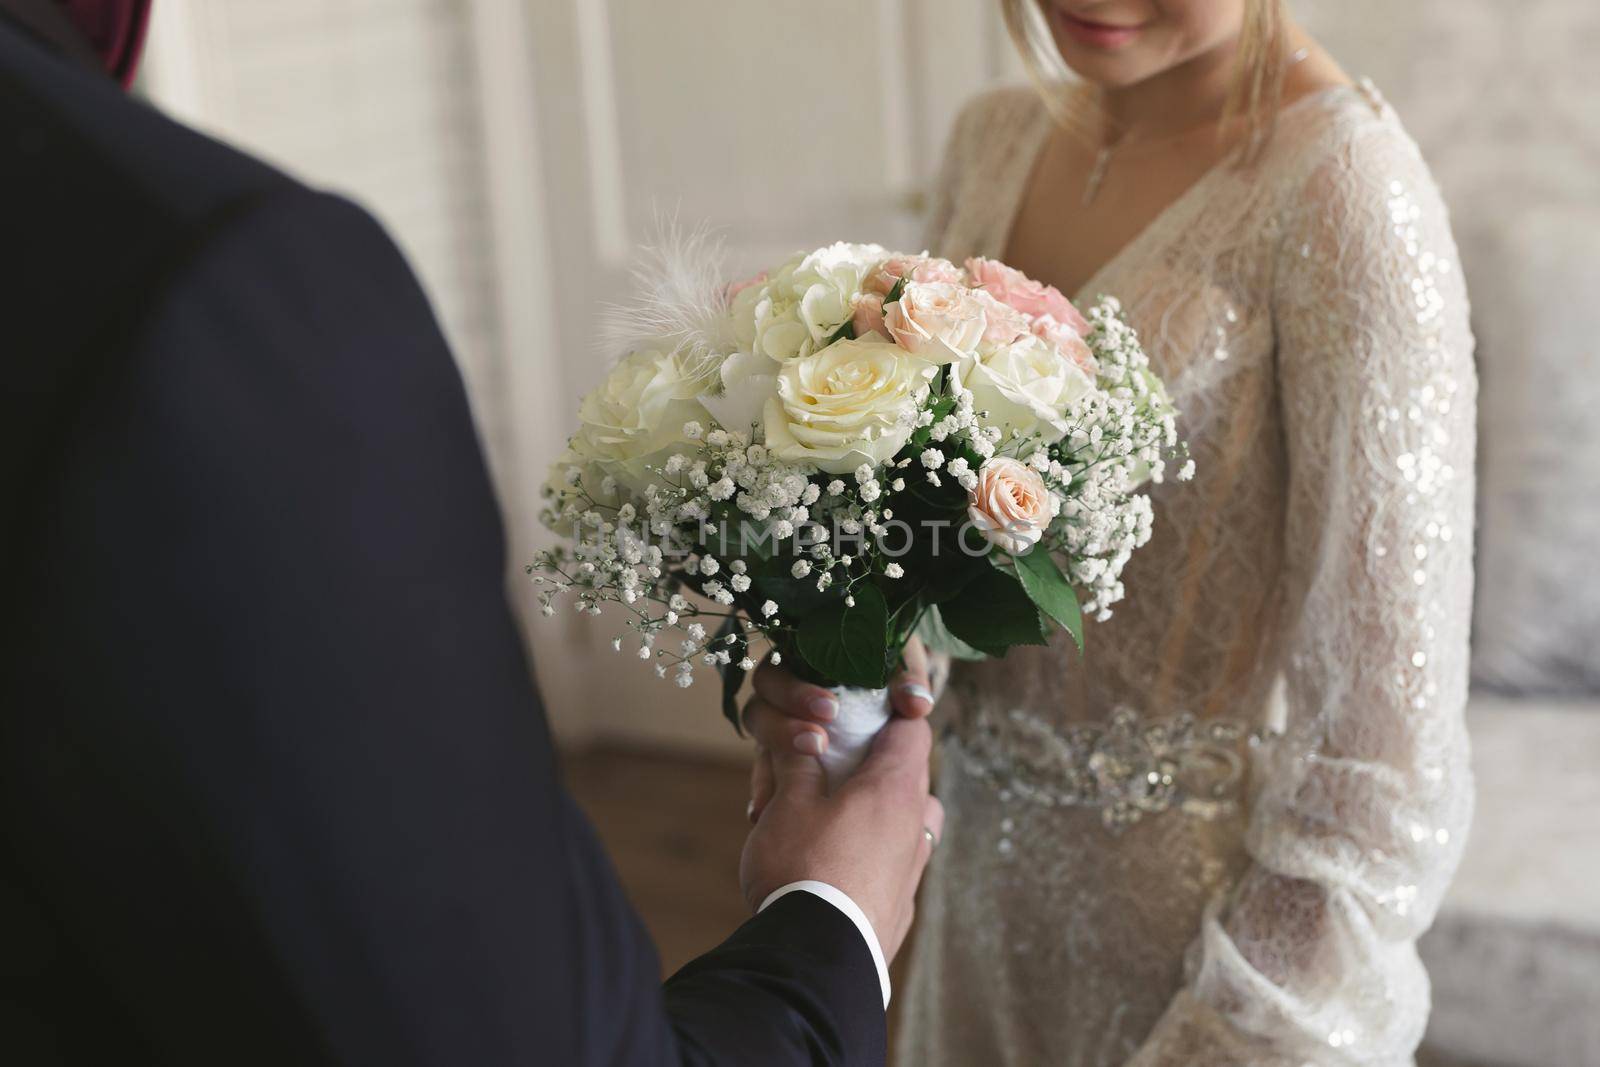 Groom gives the bride a bouquet of beautiful flowers.